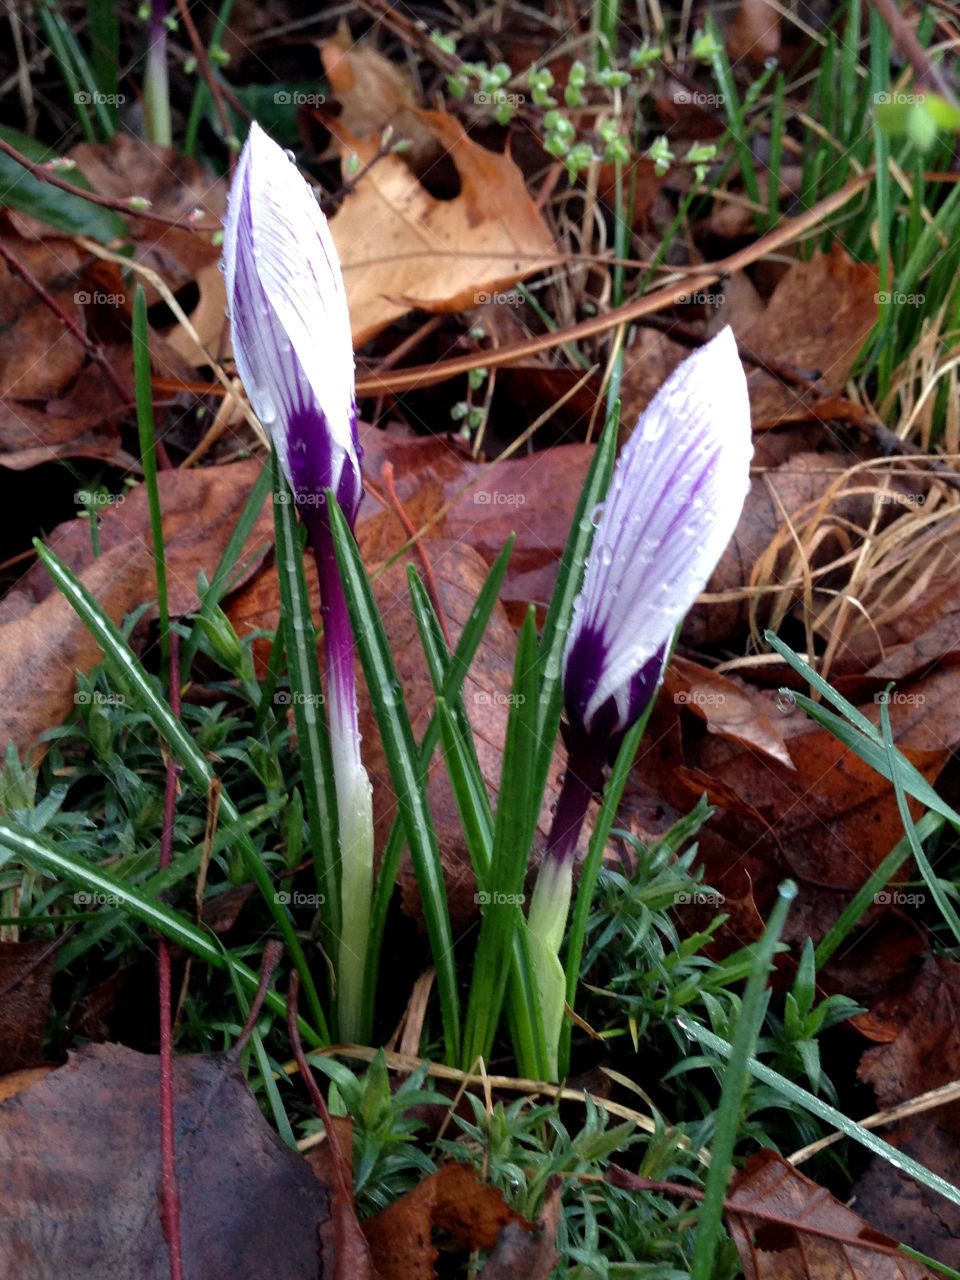 Early signs of spring Crocuses 